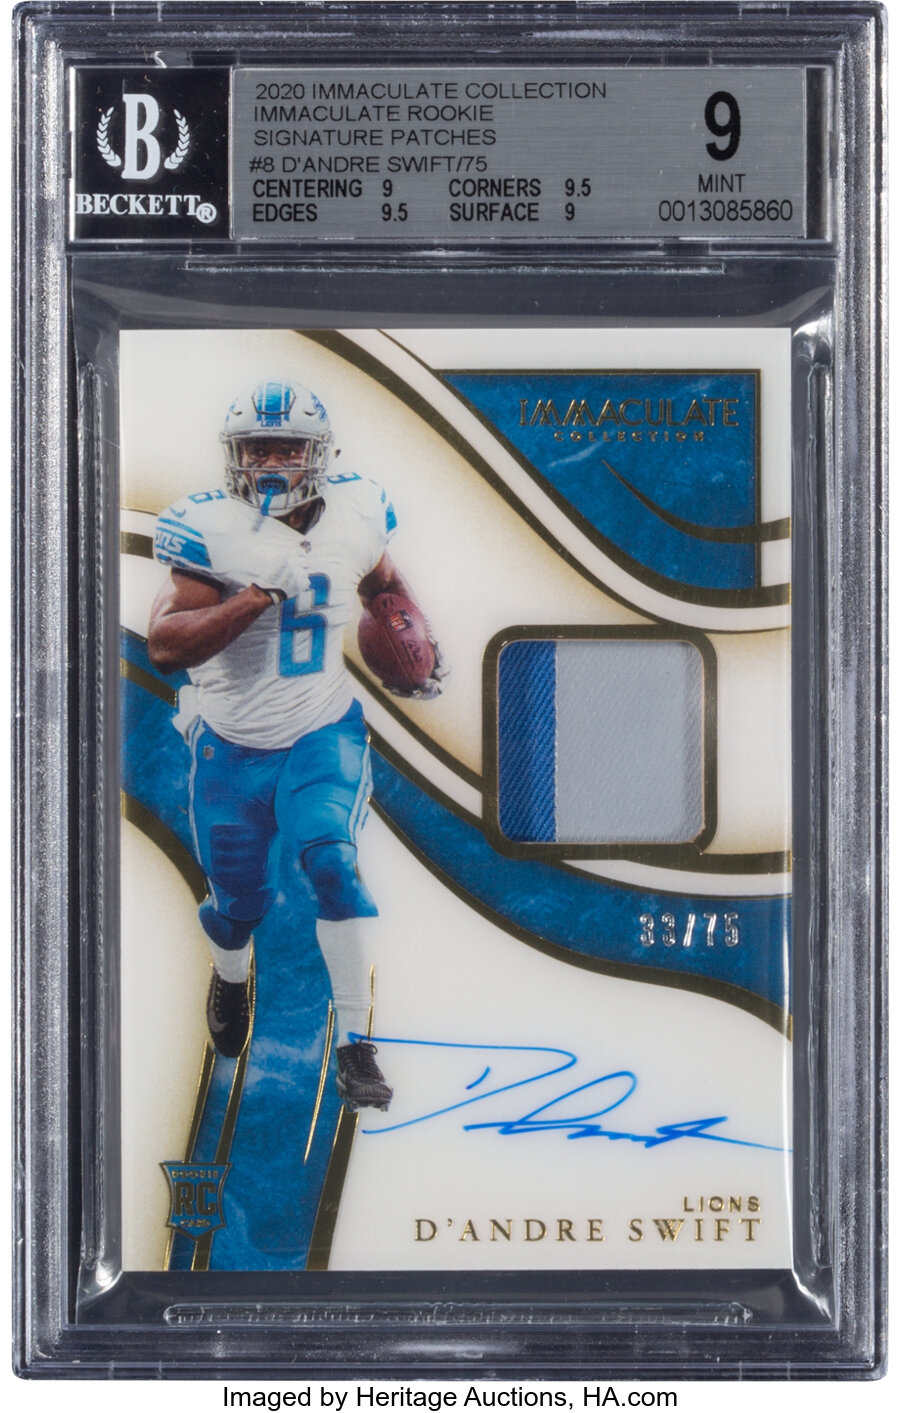 2020 Panini Immaculate Collection D'Andre Swift (Rookie Immaculate Signature Patch) #ISP8 BGS Mint 9, Auto 9 - #'d 33/75